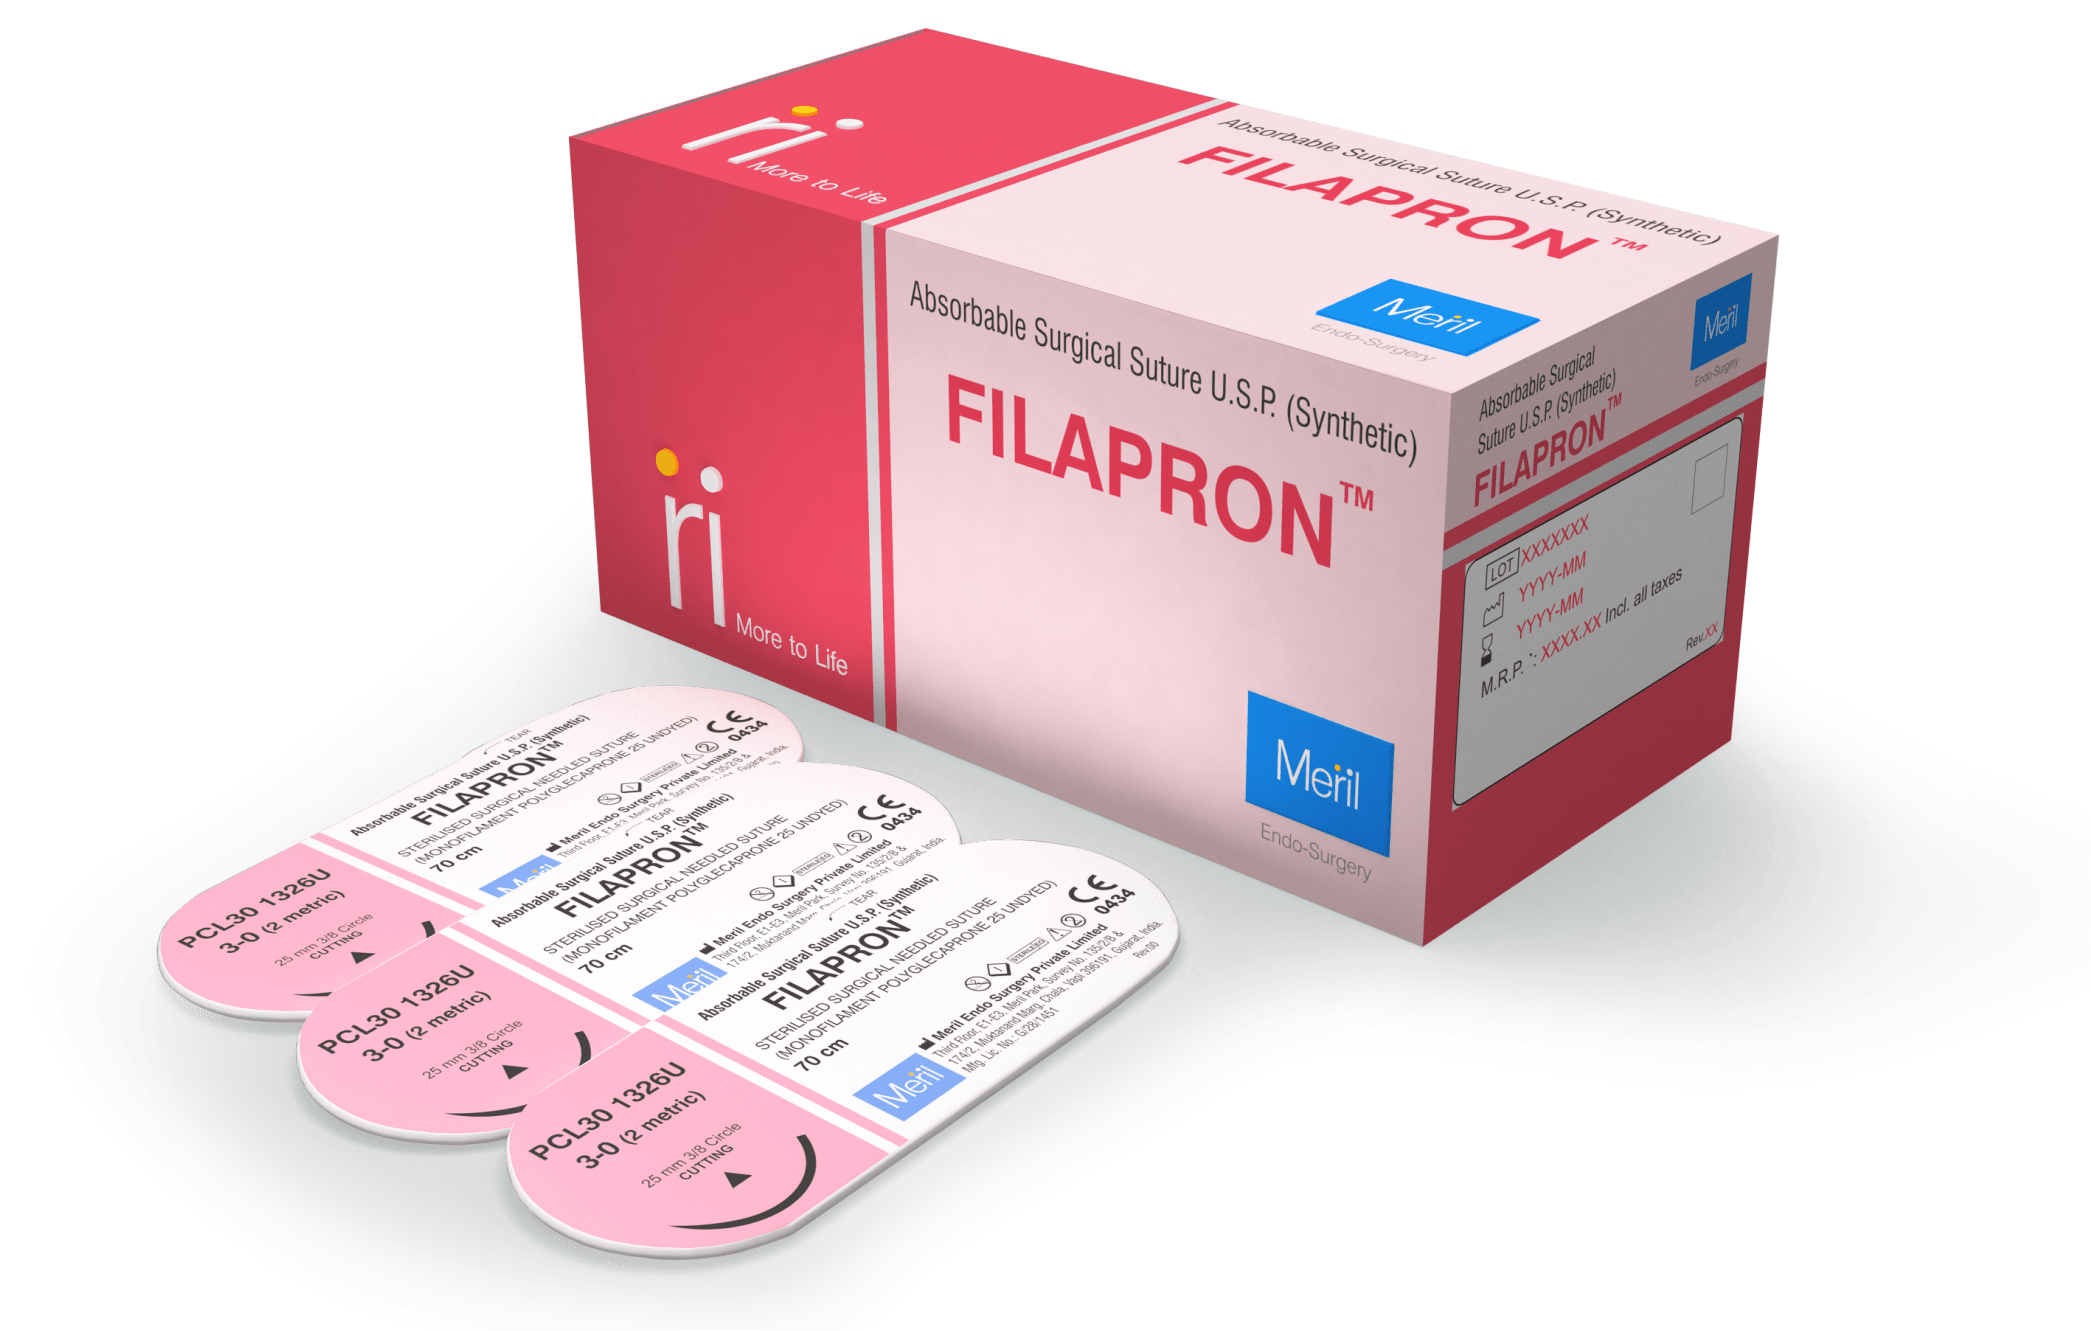 FILAPRON - Absorbable Suture